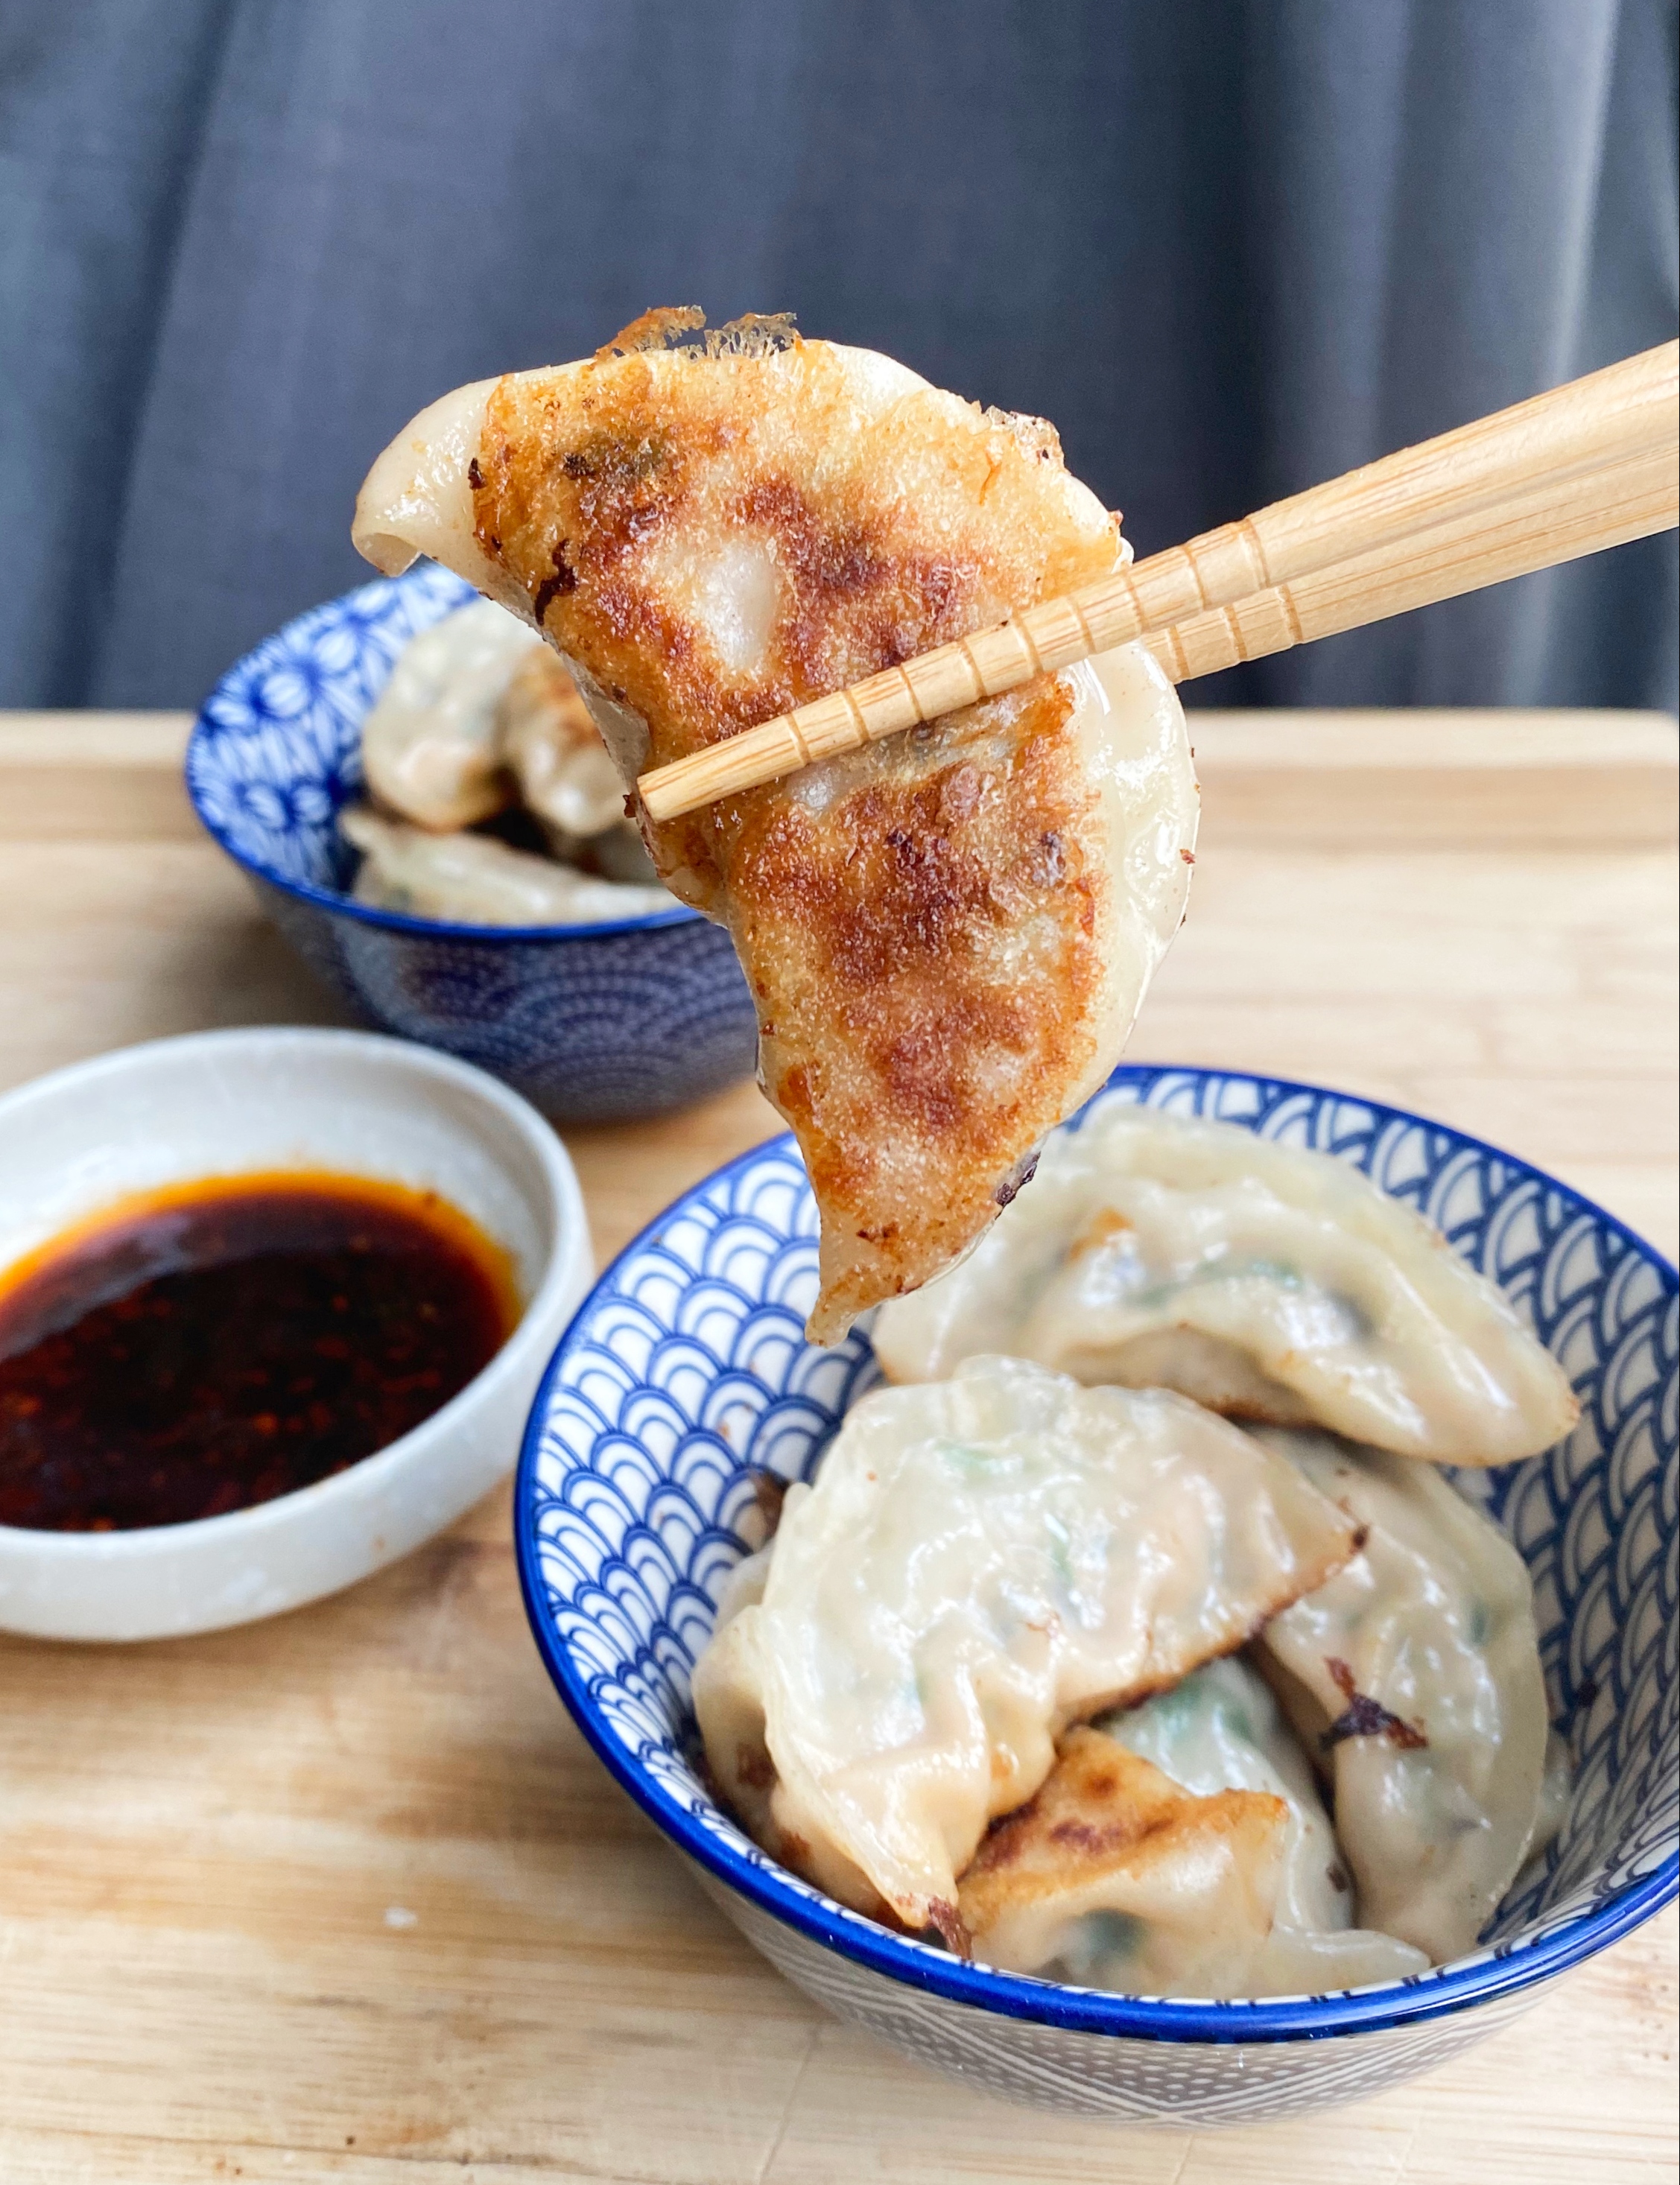 Pork, Shrimp and Chive Dumplings - cooked perfectly with a crispy bottom! Enjoy with a delicious chili soy sauce dipping sauce!